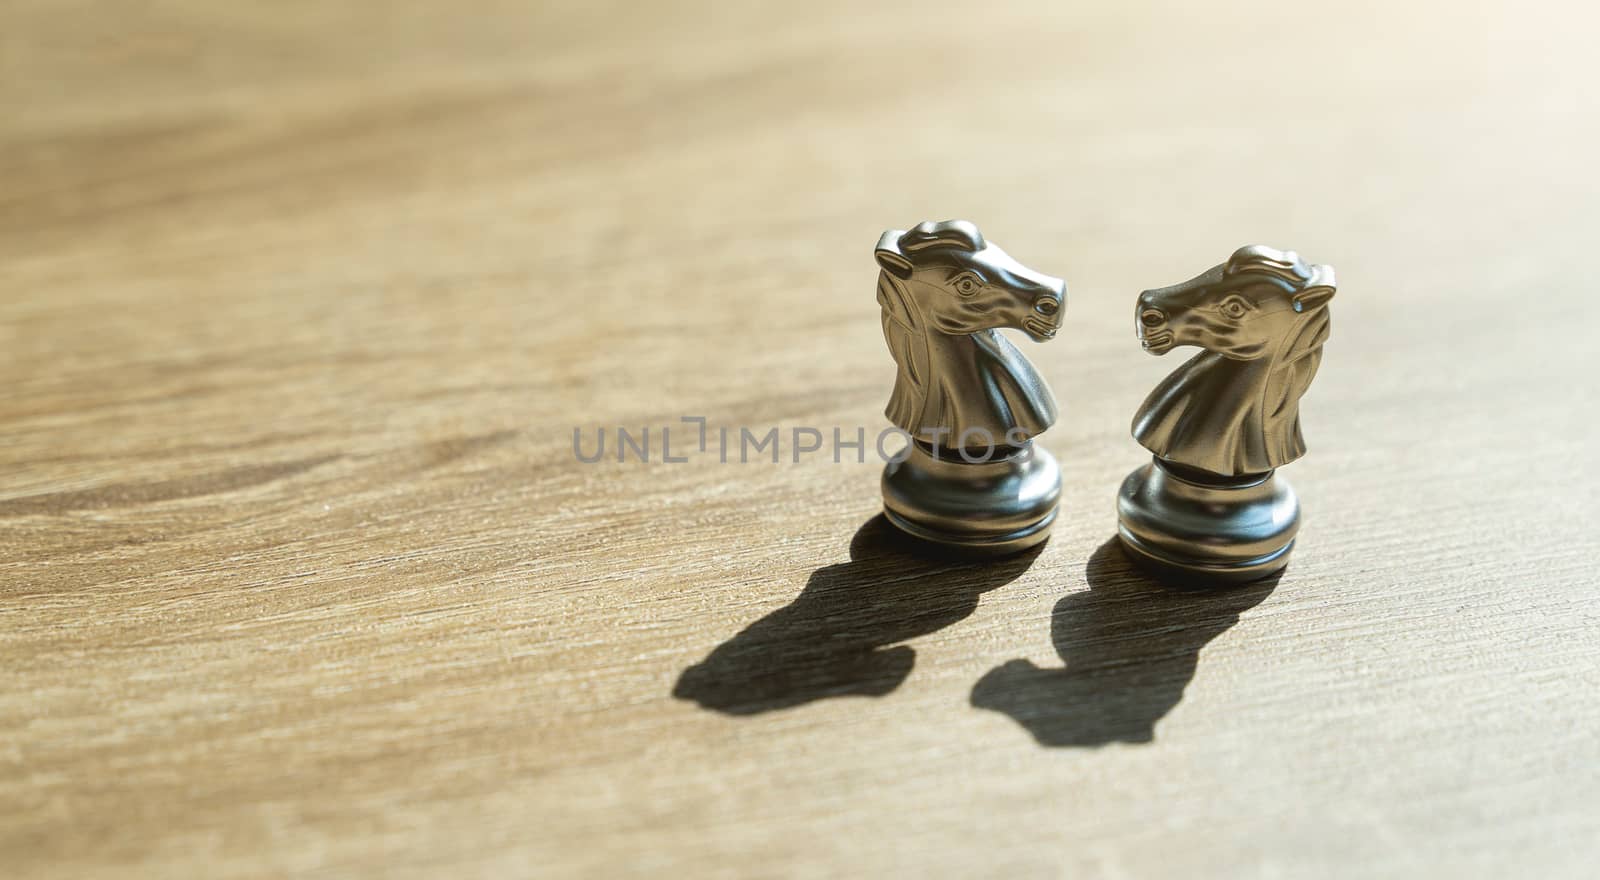 Two golden horse chess together with shadow in concept, business by Boophuket